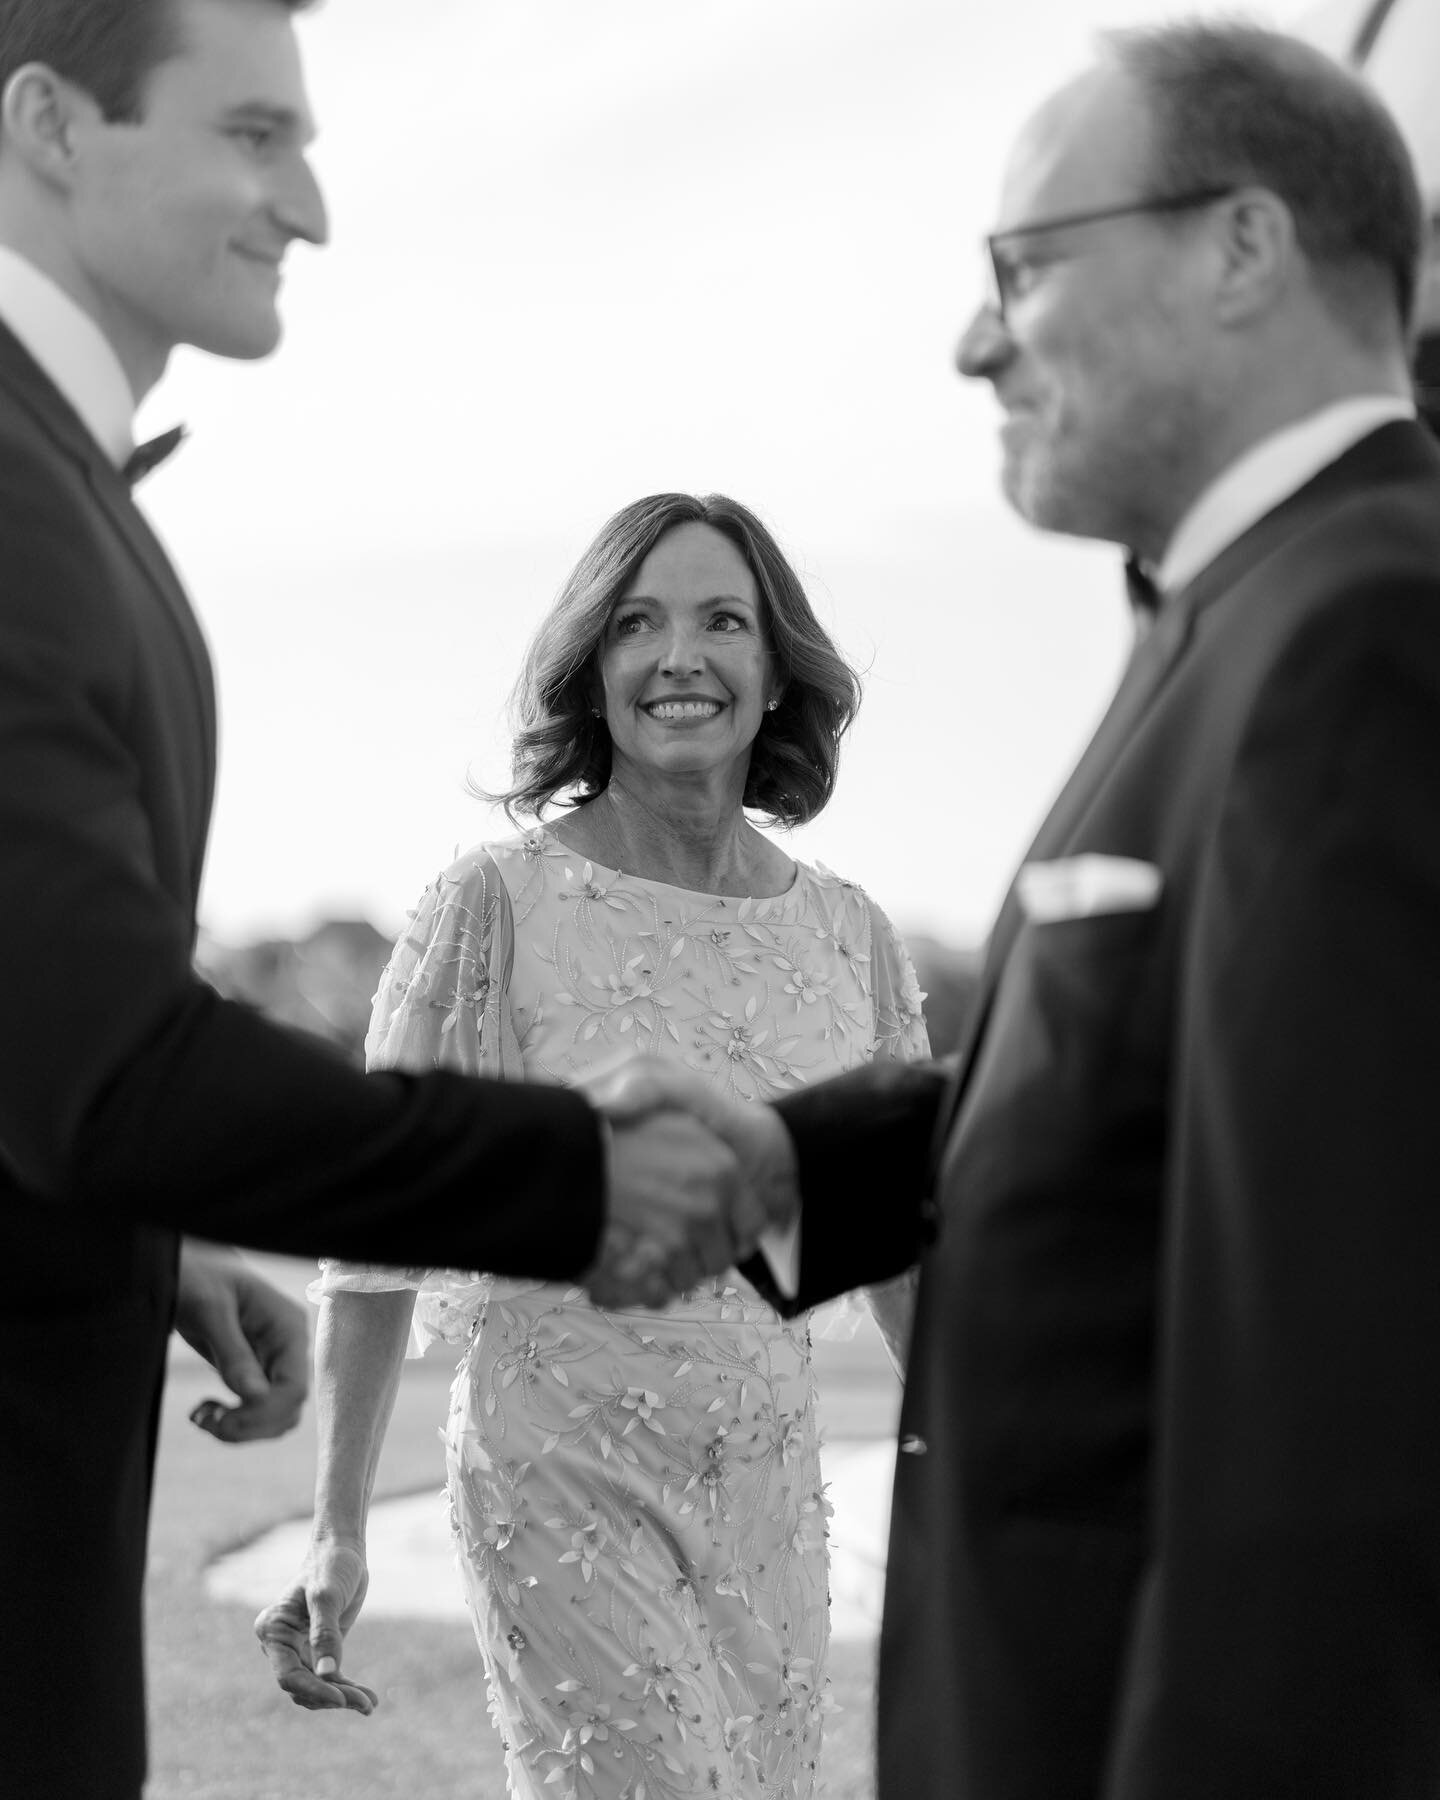 This was one of those super feel good moments. Not only for the mother of groom after he walked her down the aisle and shook his fathers hand before watching their son be wed, but also for me being in the right place at the right time to catch this s